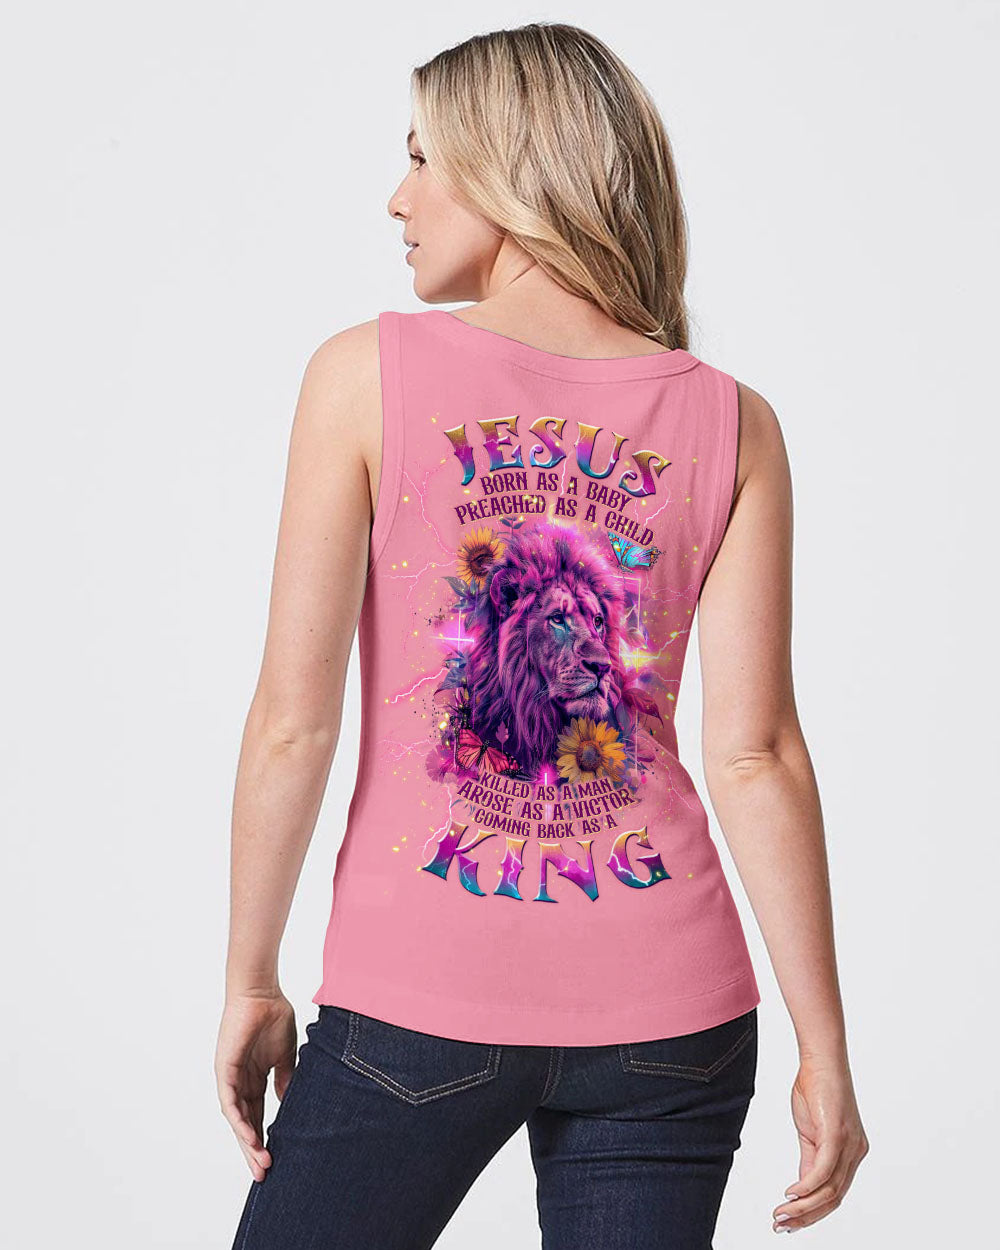 Coming Back As A King Lion Women's All Over Print Shirt - Tlnt0904243